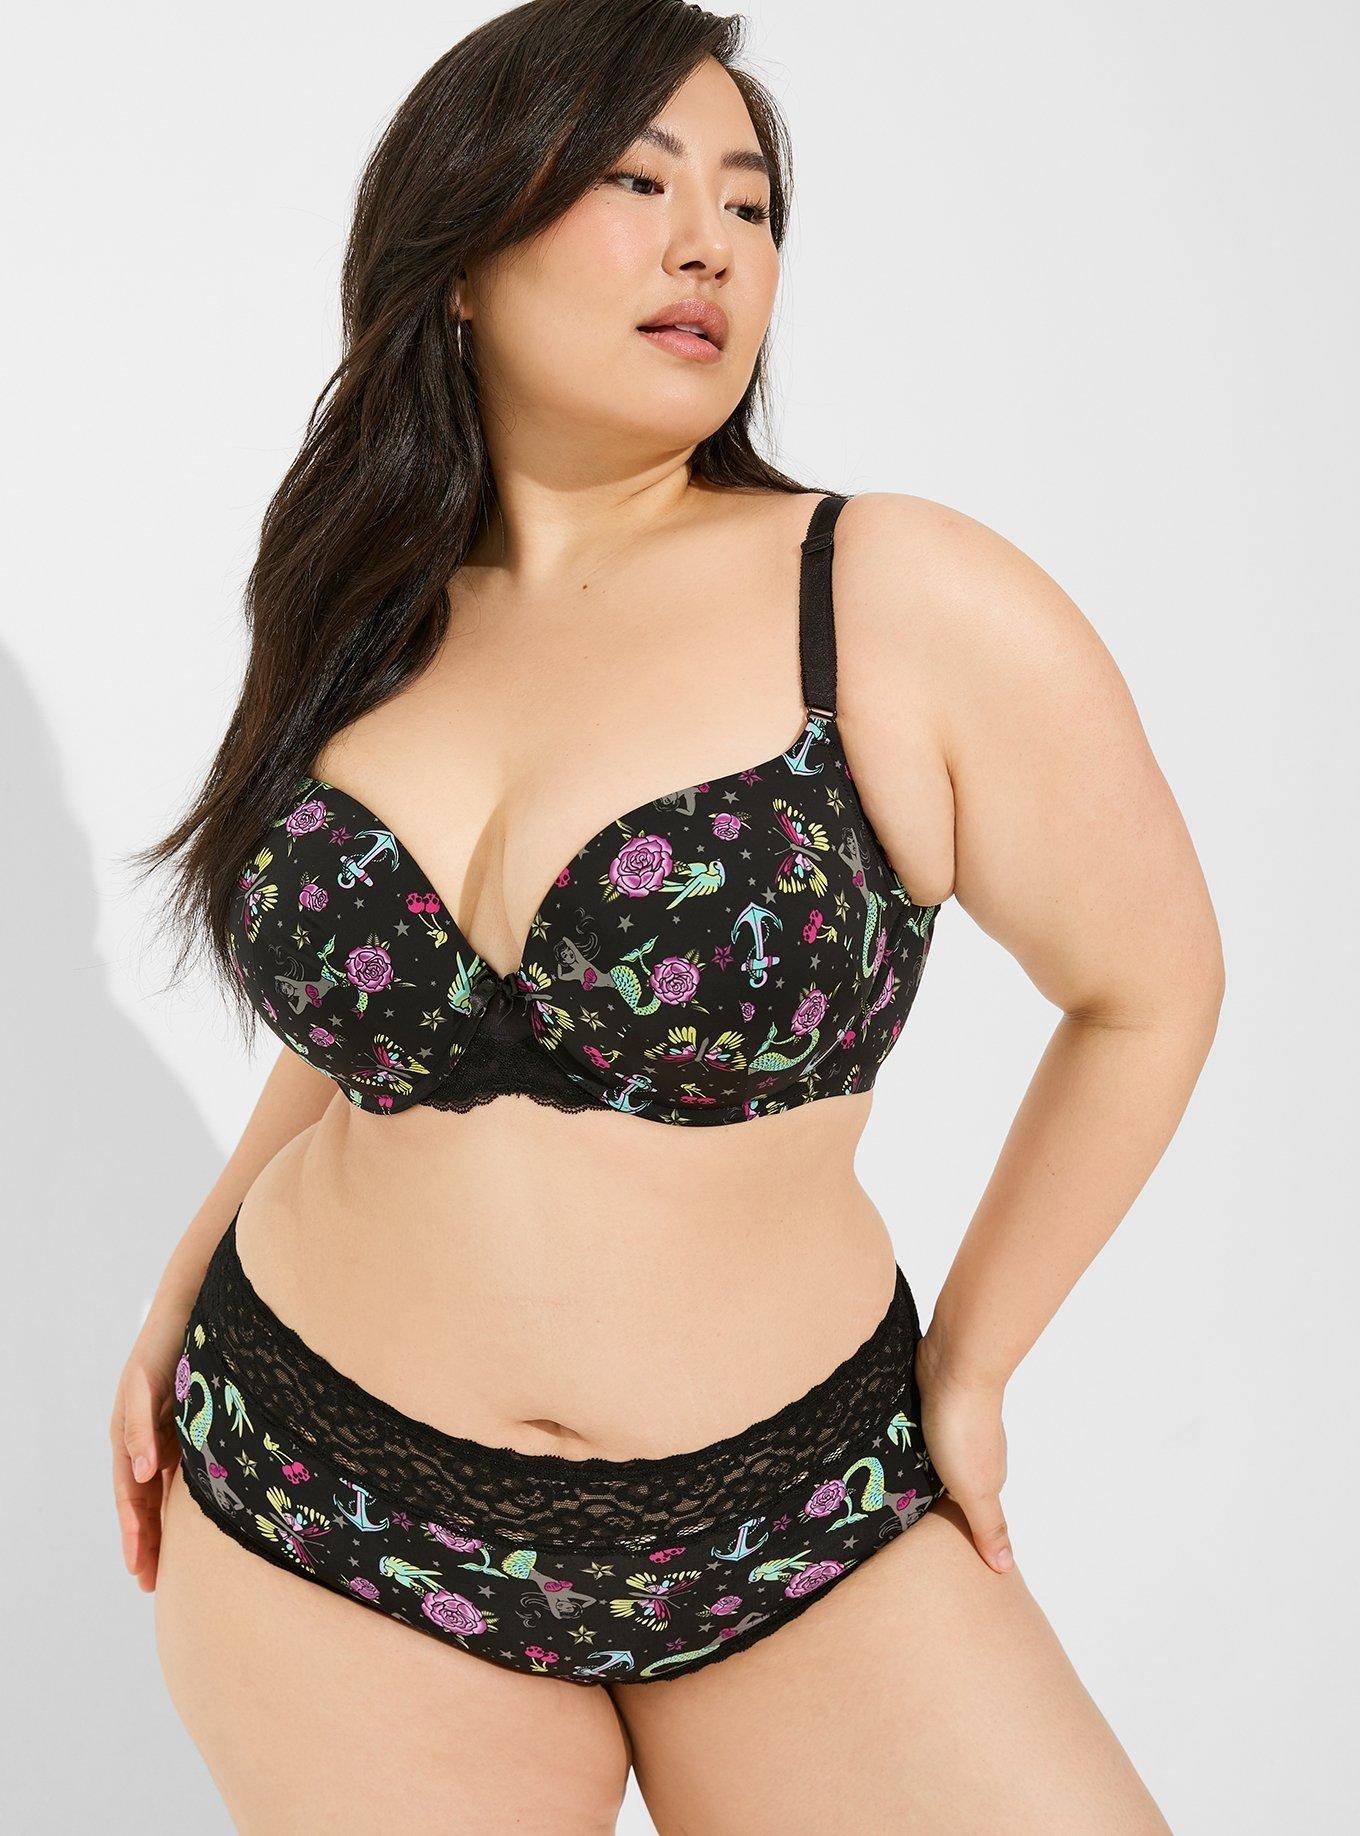 Plus Size - Second Skin Mid-Rise Cheeky Lace Trim Panty - Torrid